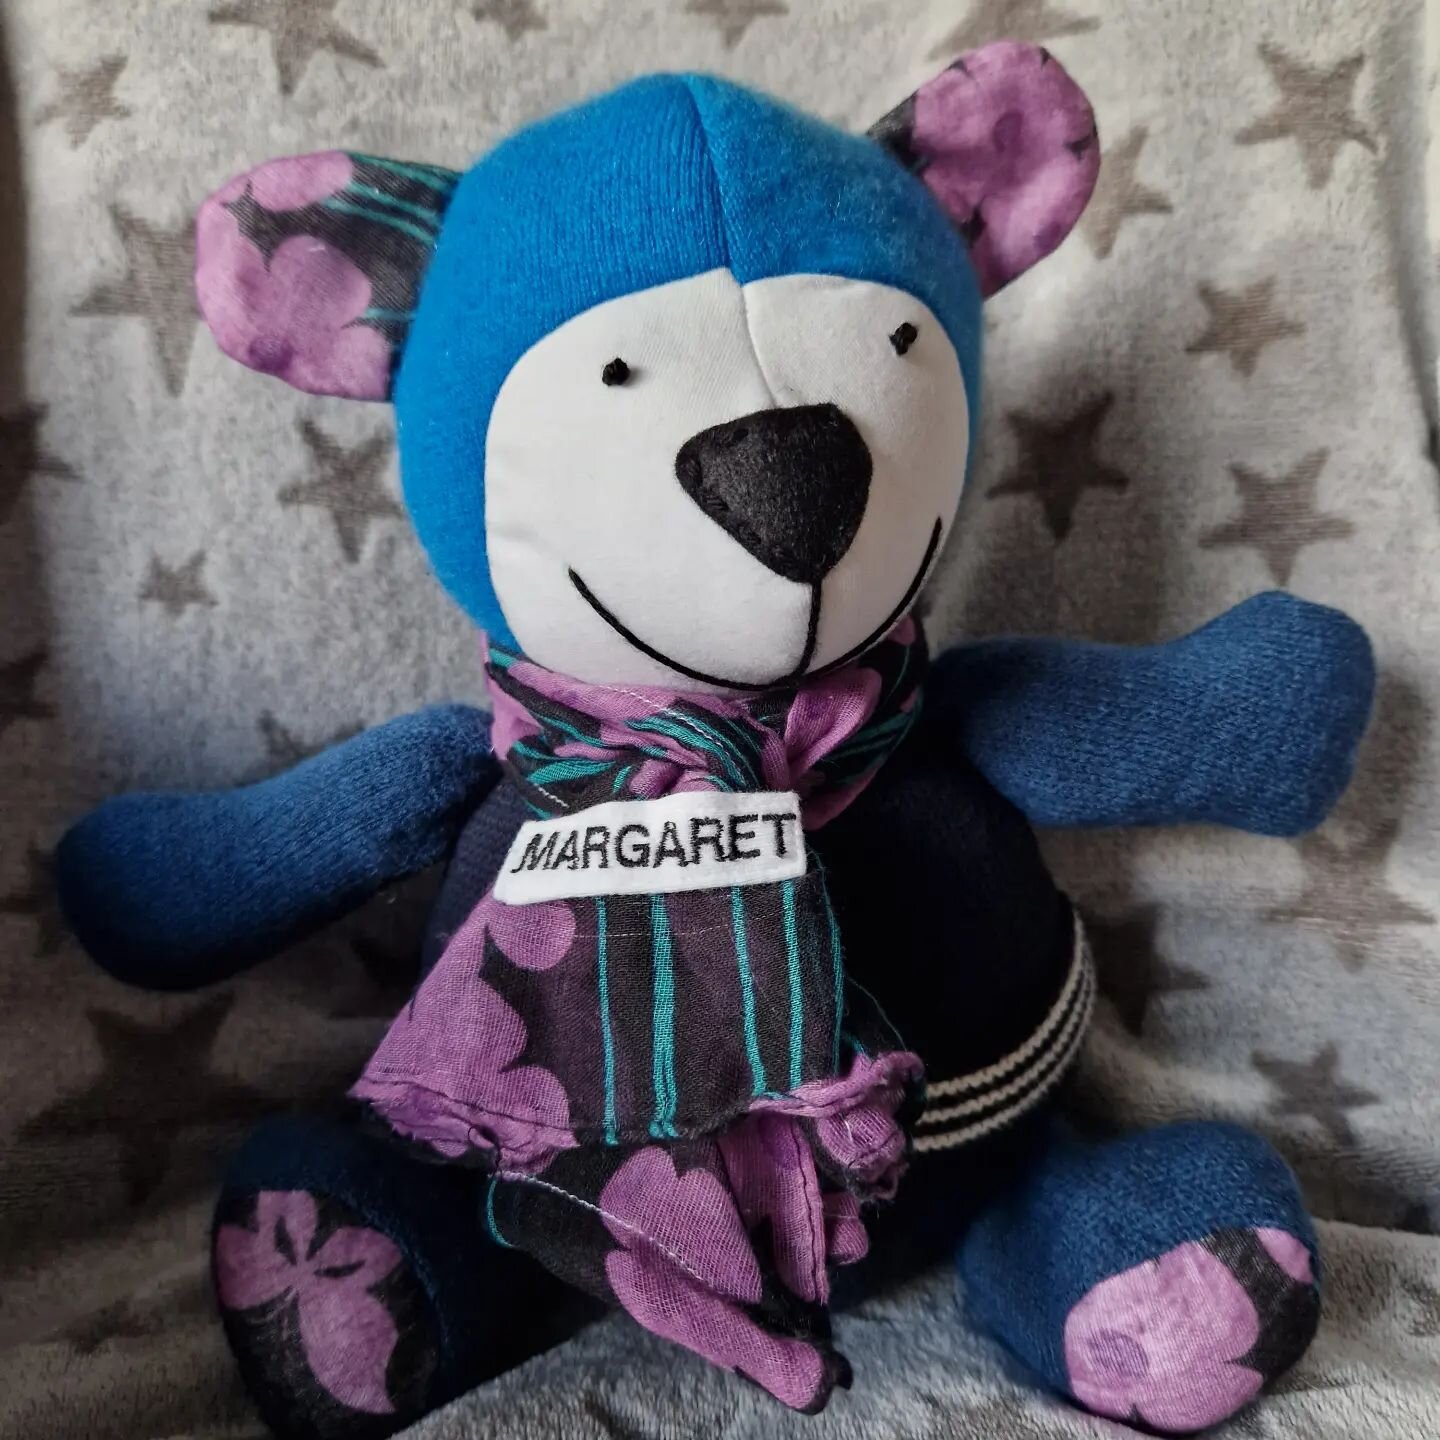 A year ago we lost my dearly loved Auntie Margaret. It is fair to say that l miss her so very much, each and every day. It was my greatest privilege to write and deliver the eulogy at her funeral. I had this little friend made from her clothes and it